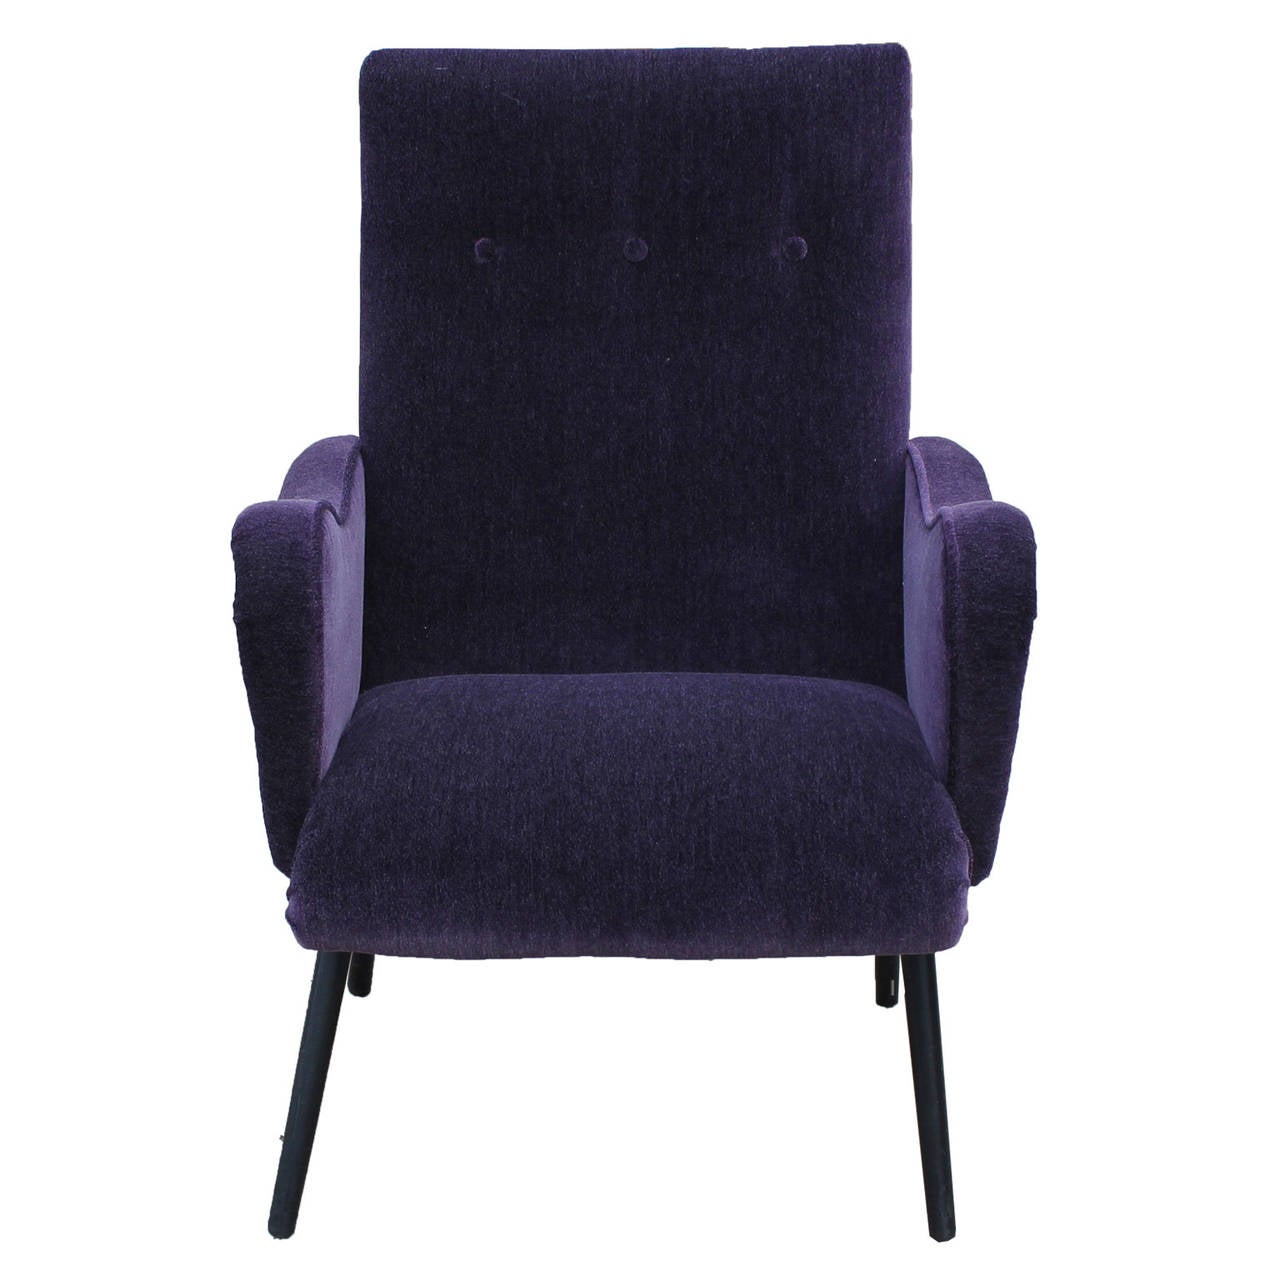 Knockout Opulent Italian Armchair / lounge chair with New purple velvet fabric. Chair also has restored black splayed legs. Very comfortable and unique. circa 1950s.